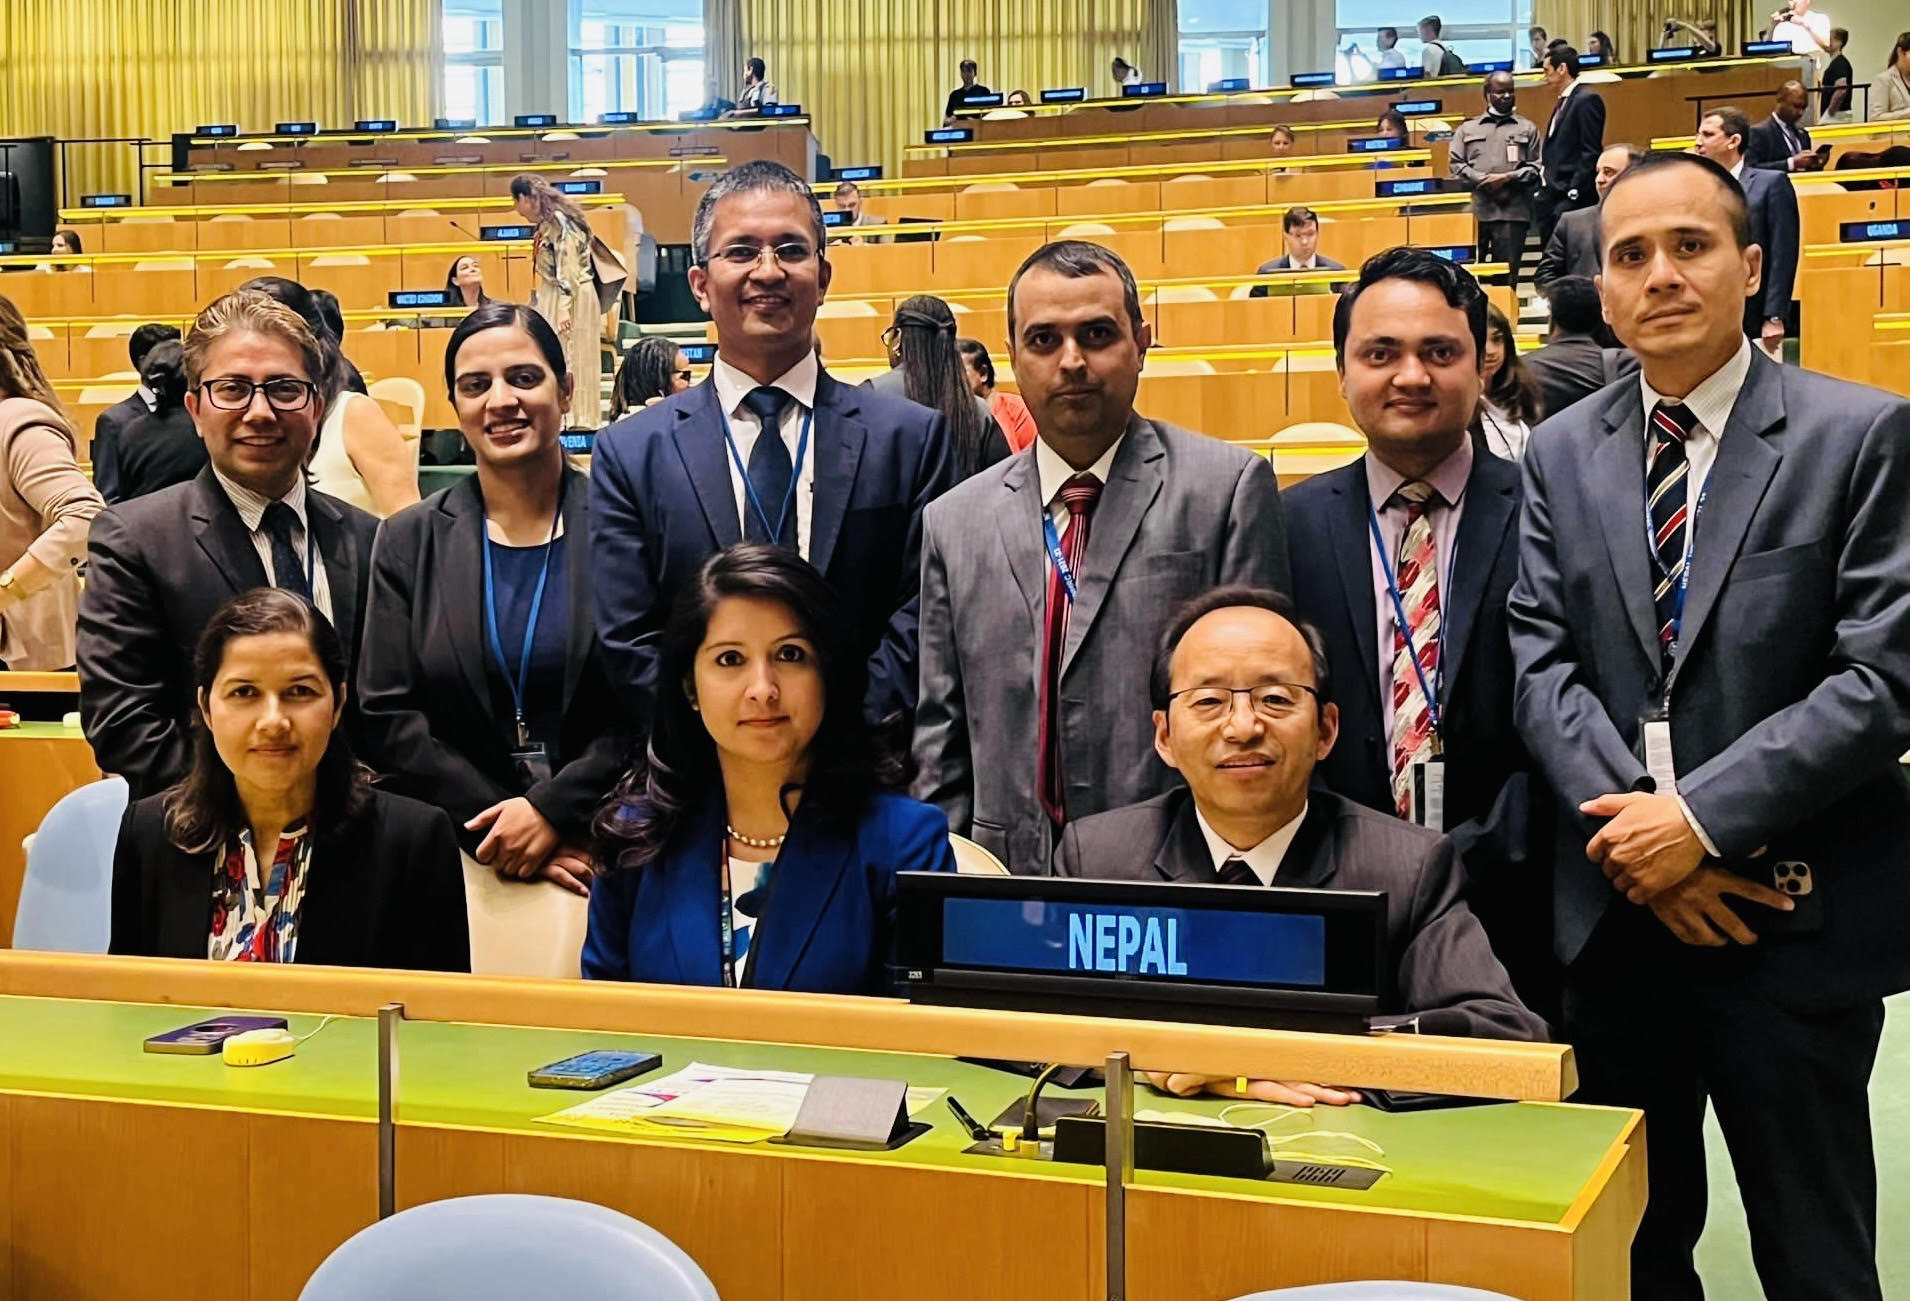 Nepal elected to the United Nations Economic and Social Council